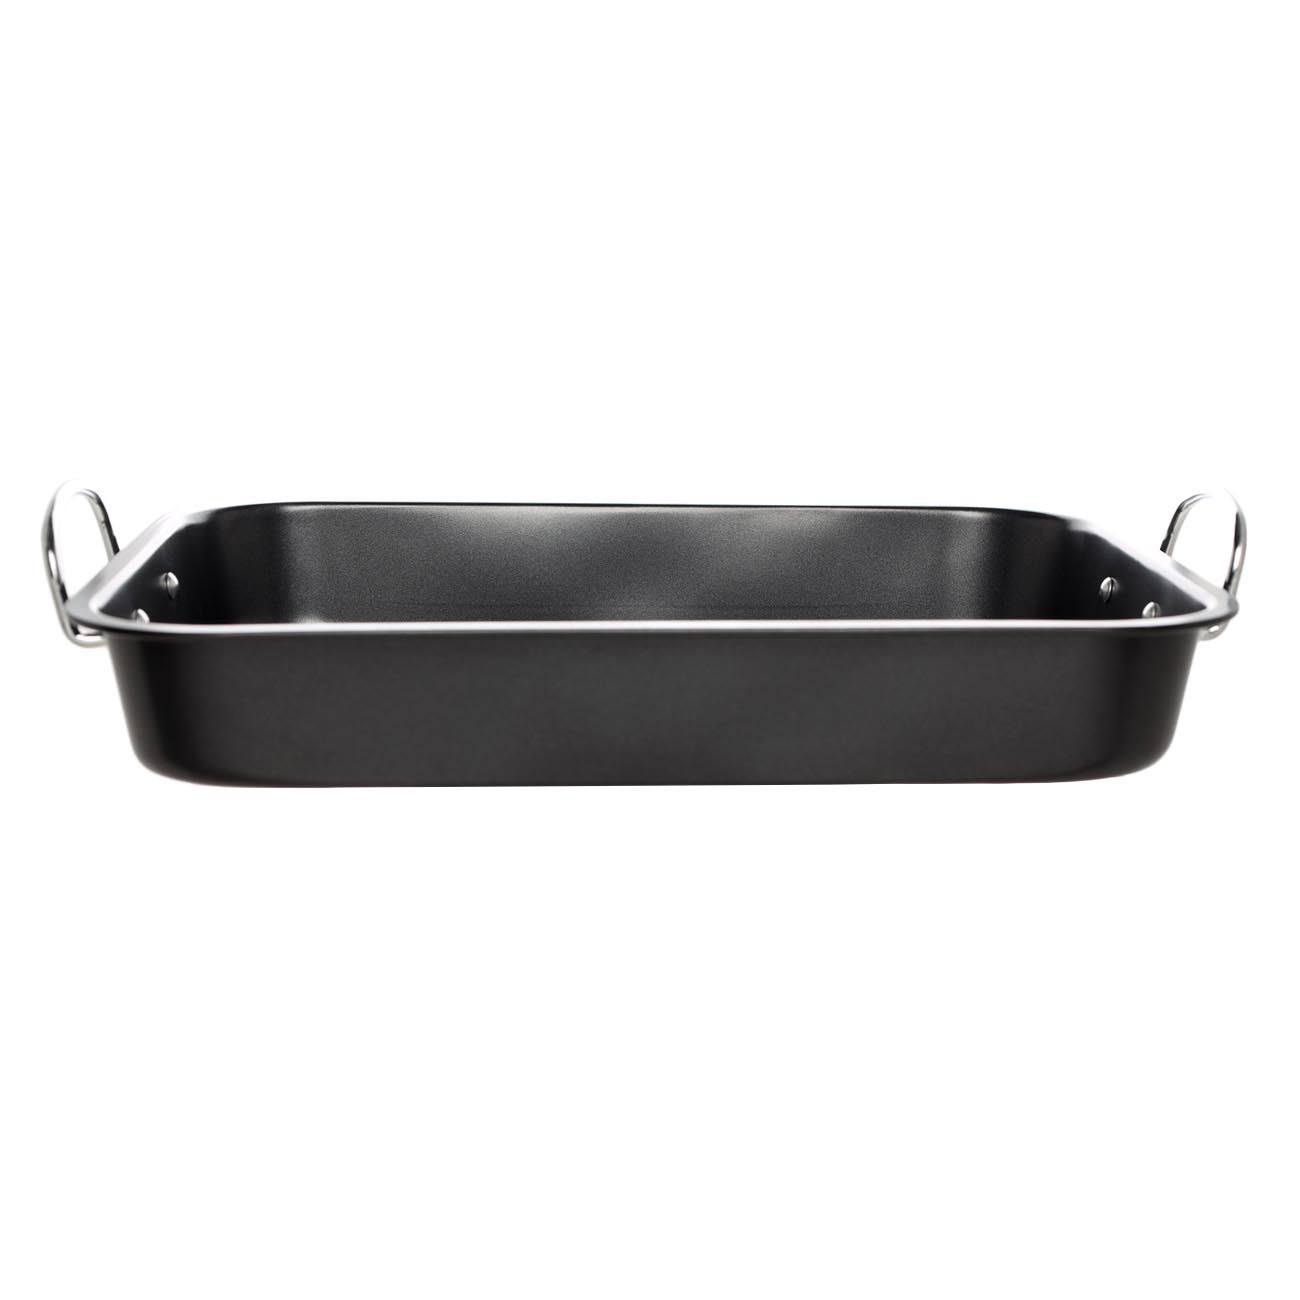 Baking tray, 37x29 cm, with handles and grill, coated, steel, black, BBQ изображение № 4